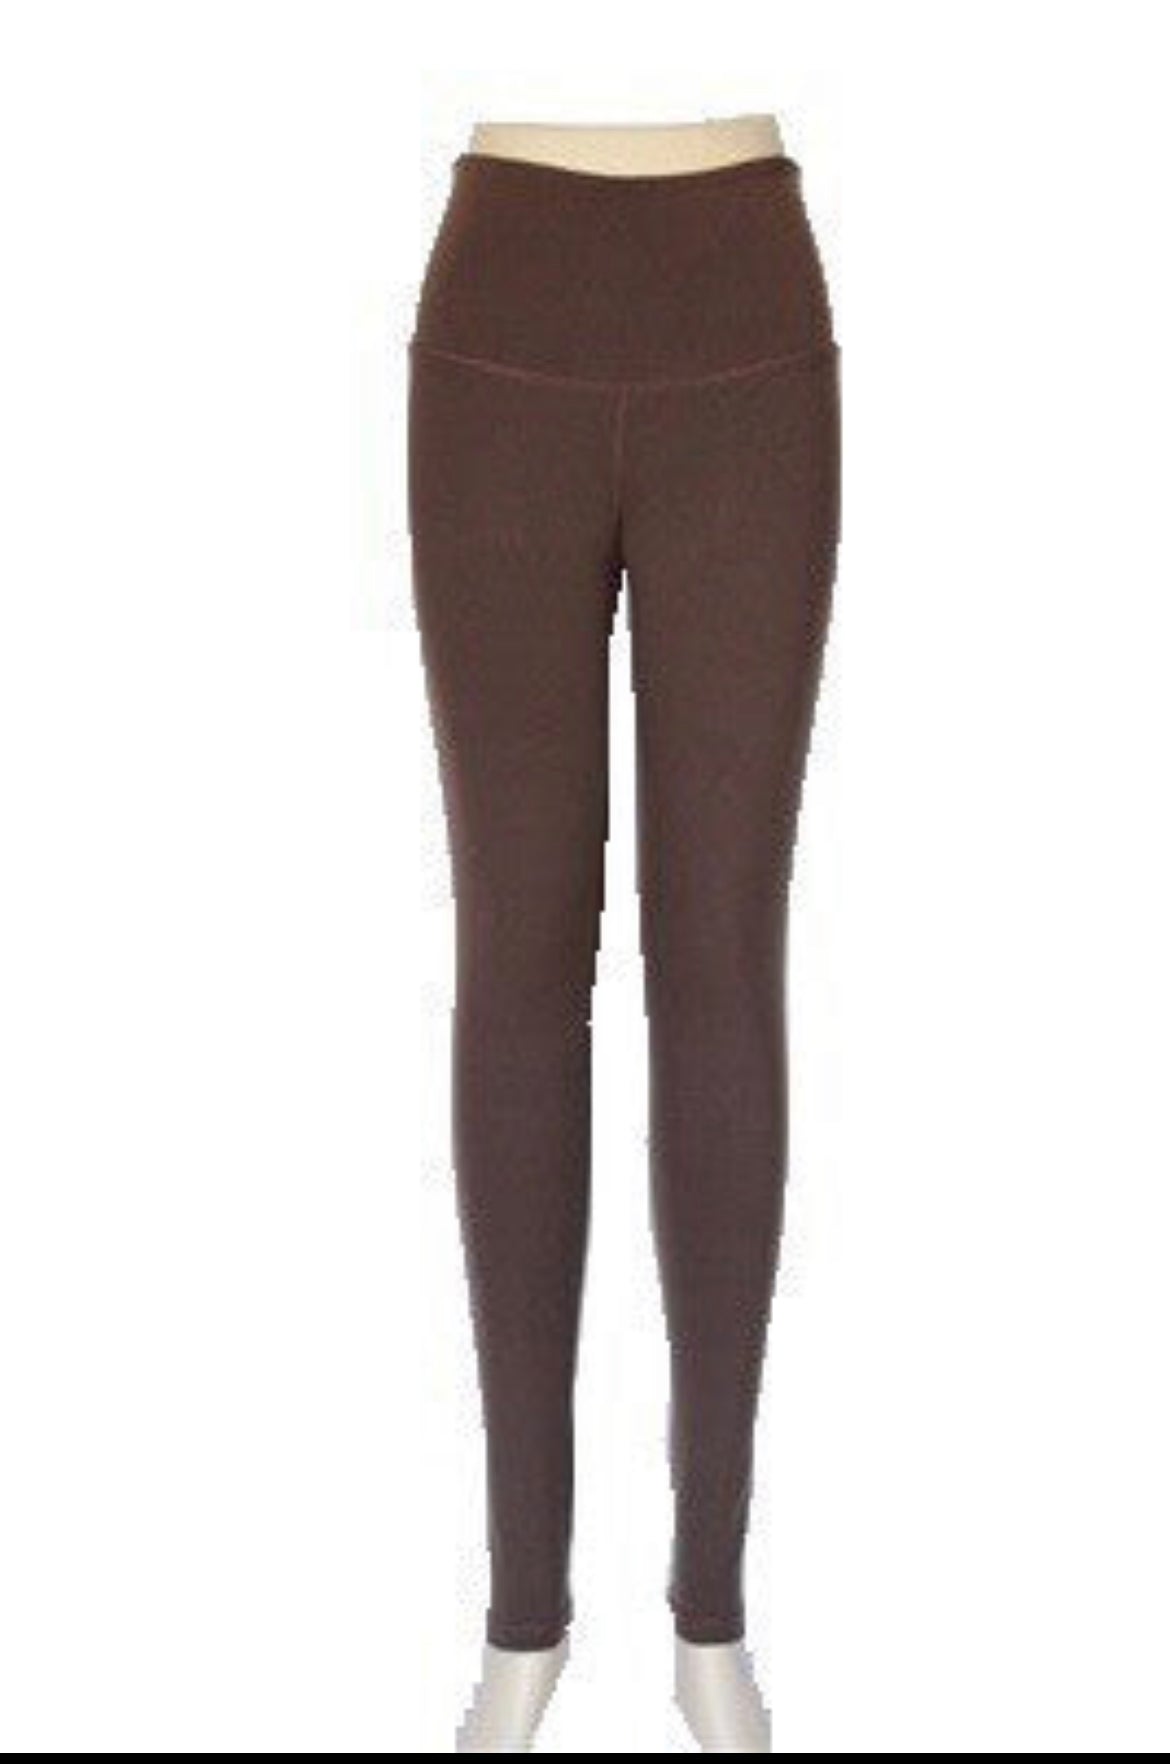 A New Day Women's High Waisted Seamless Twill Leggings Black Size L/XL.